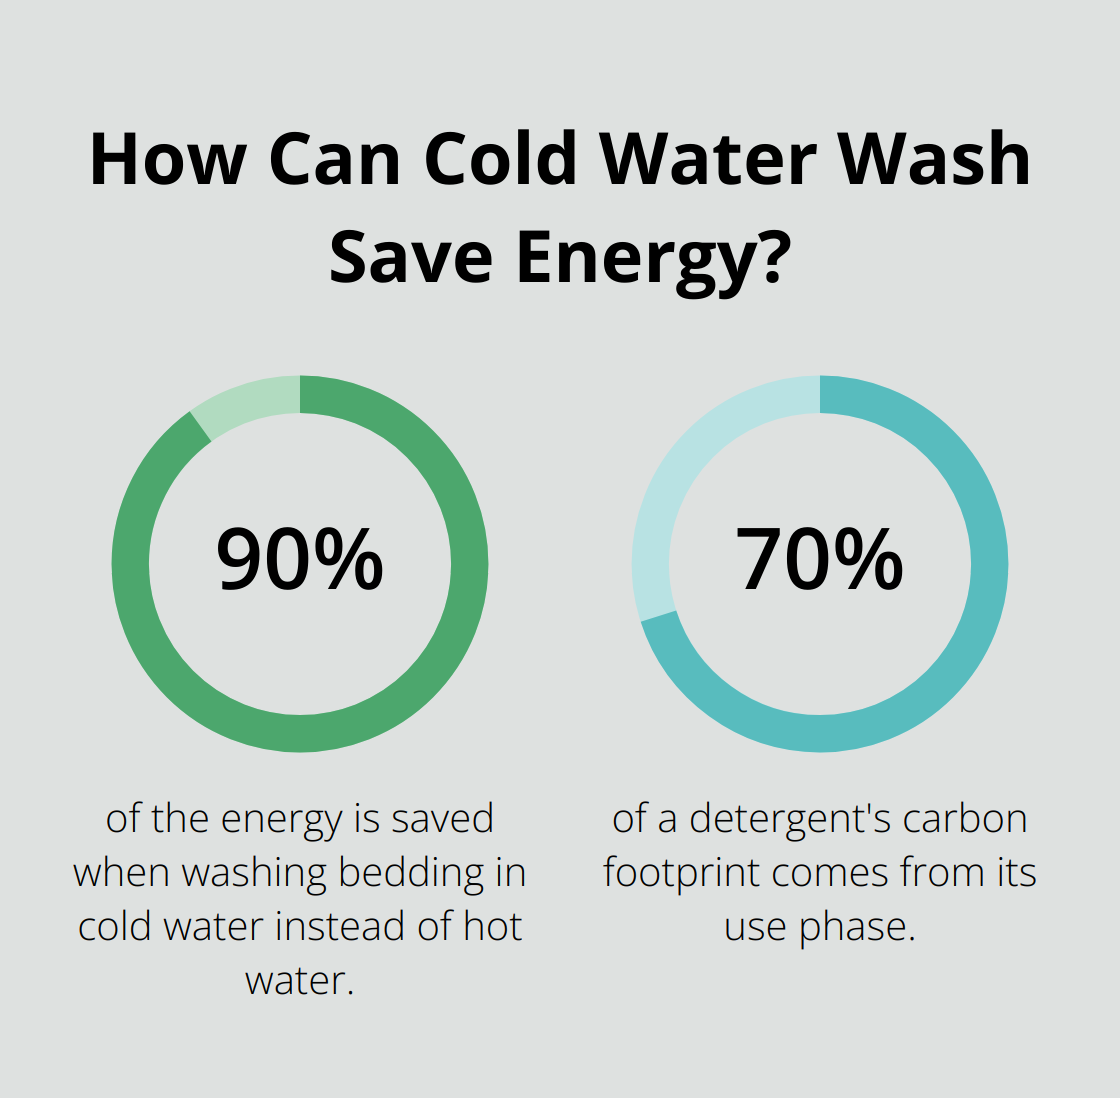 Fact - How Can Cold Water Wash Save Energy?